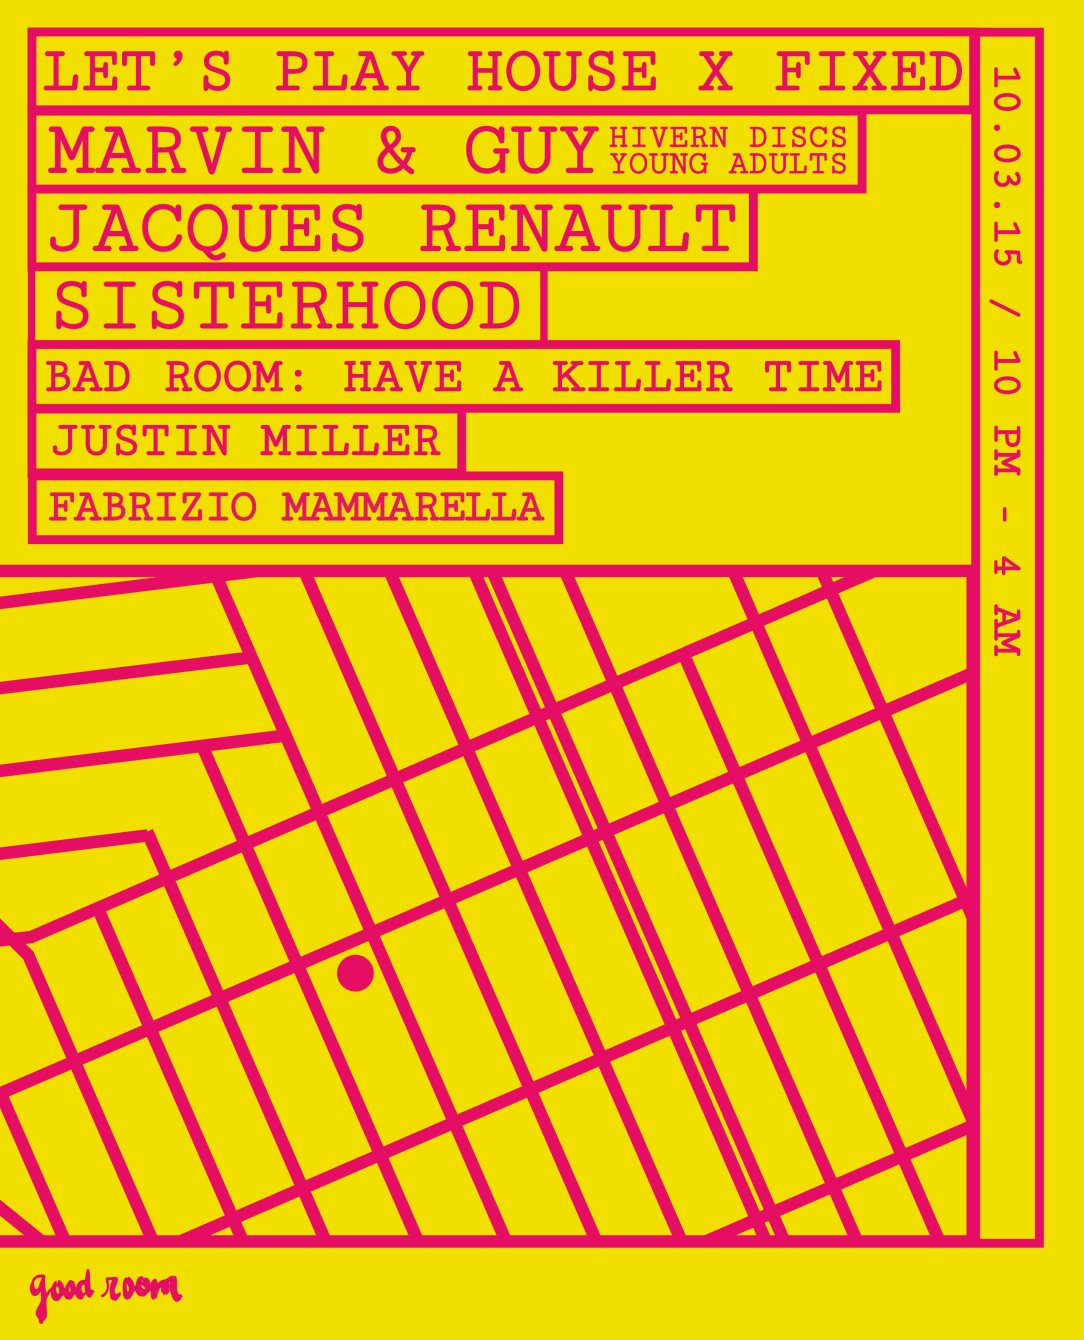 Let's Play House & Fixed: Marvin & Guy, Jacques Renault, Sisterhood, Justin Miller & More - Flyer front